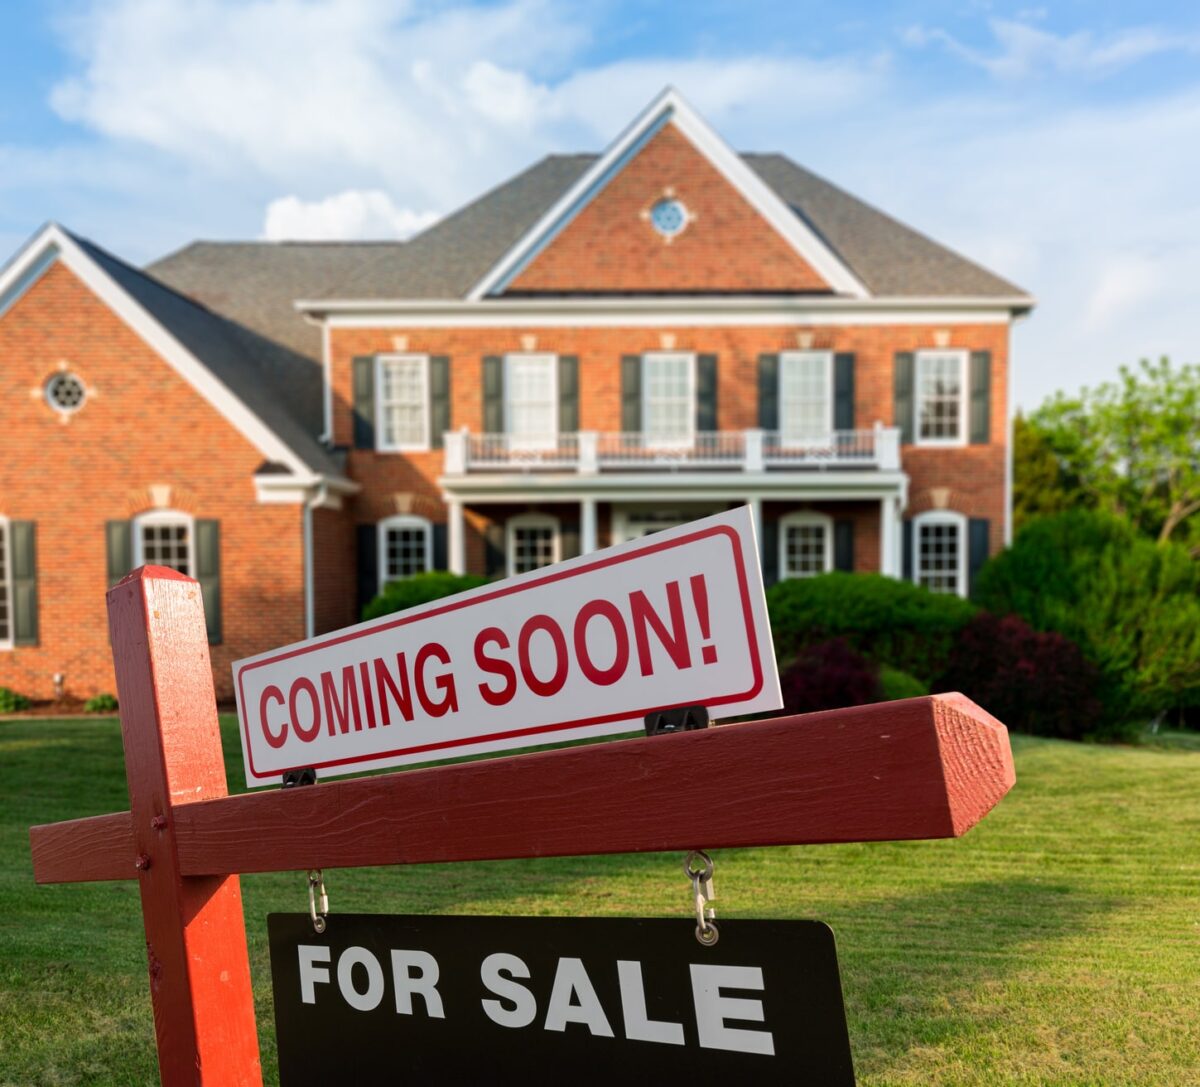 It's Time To Sell Your Home Soon